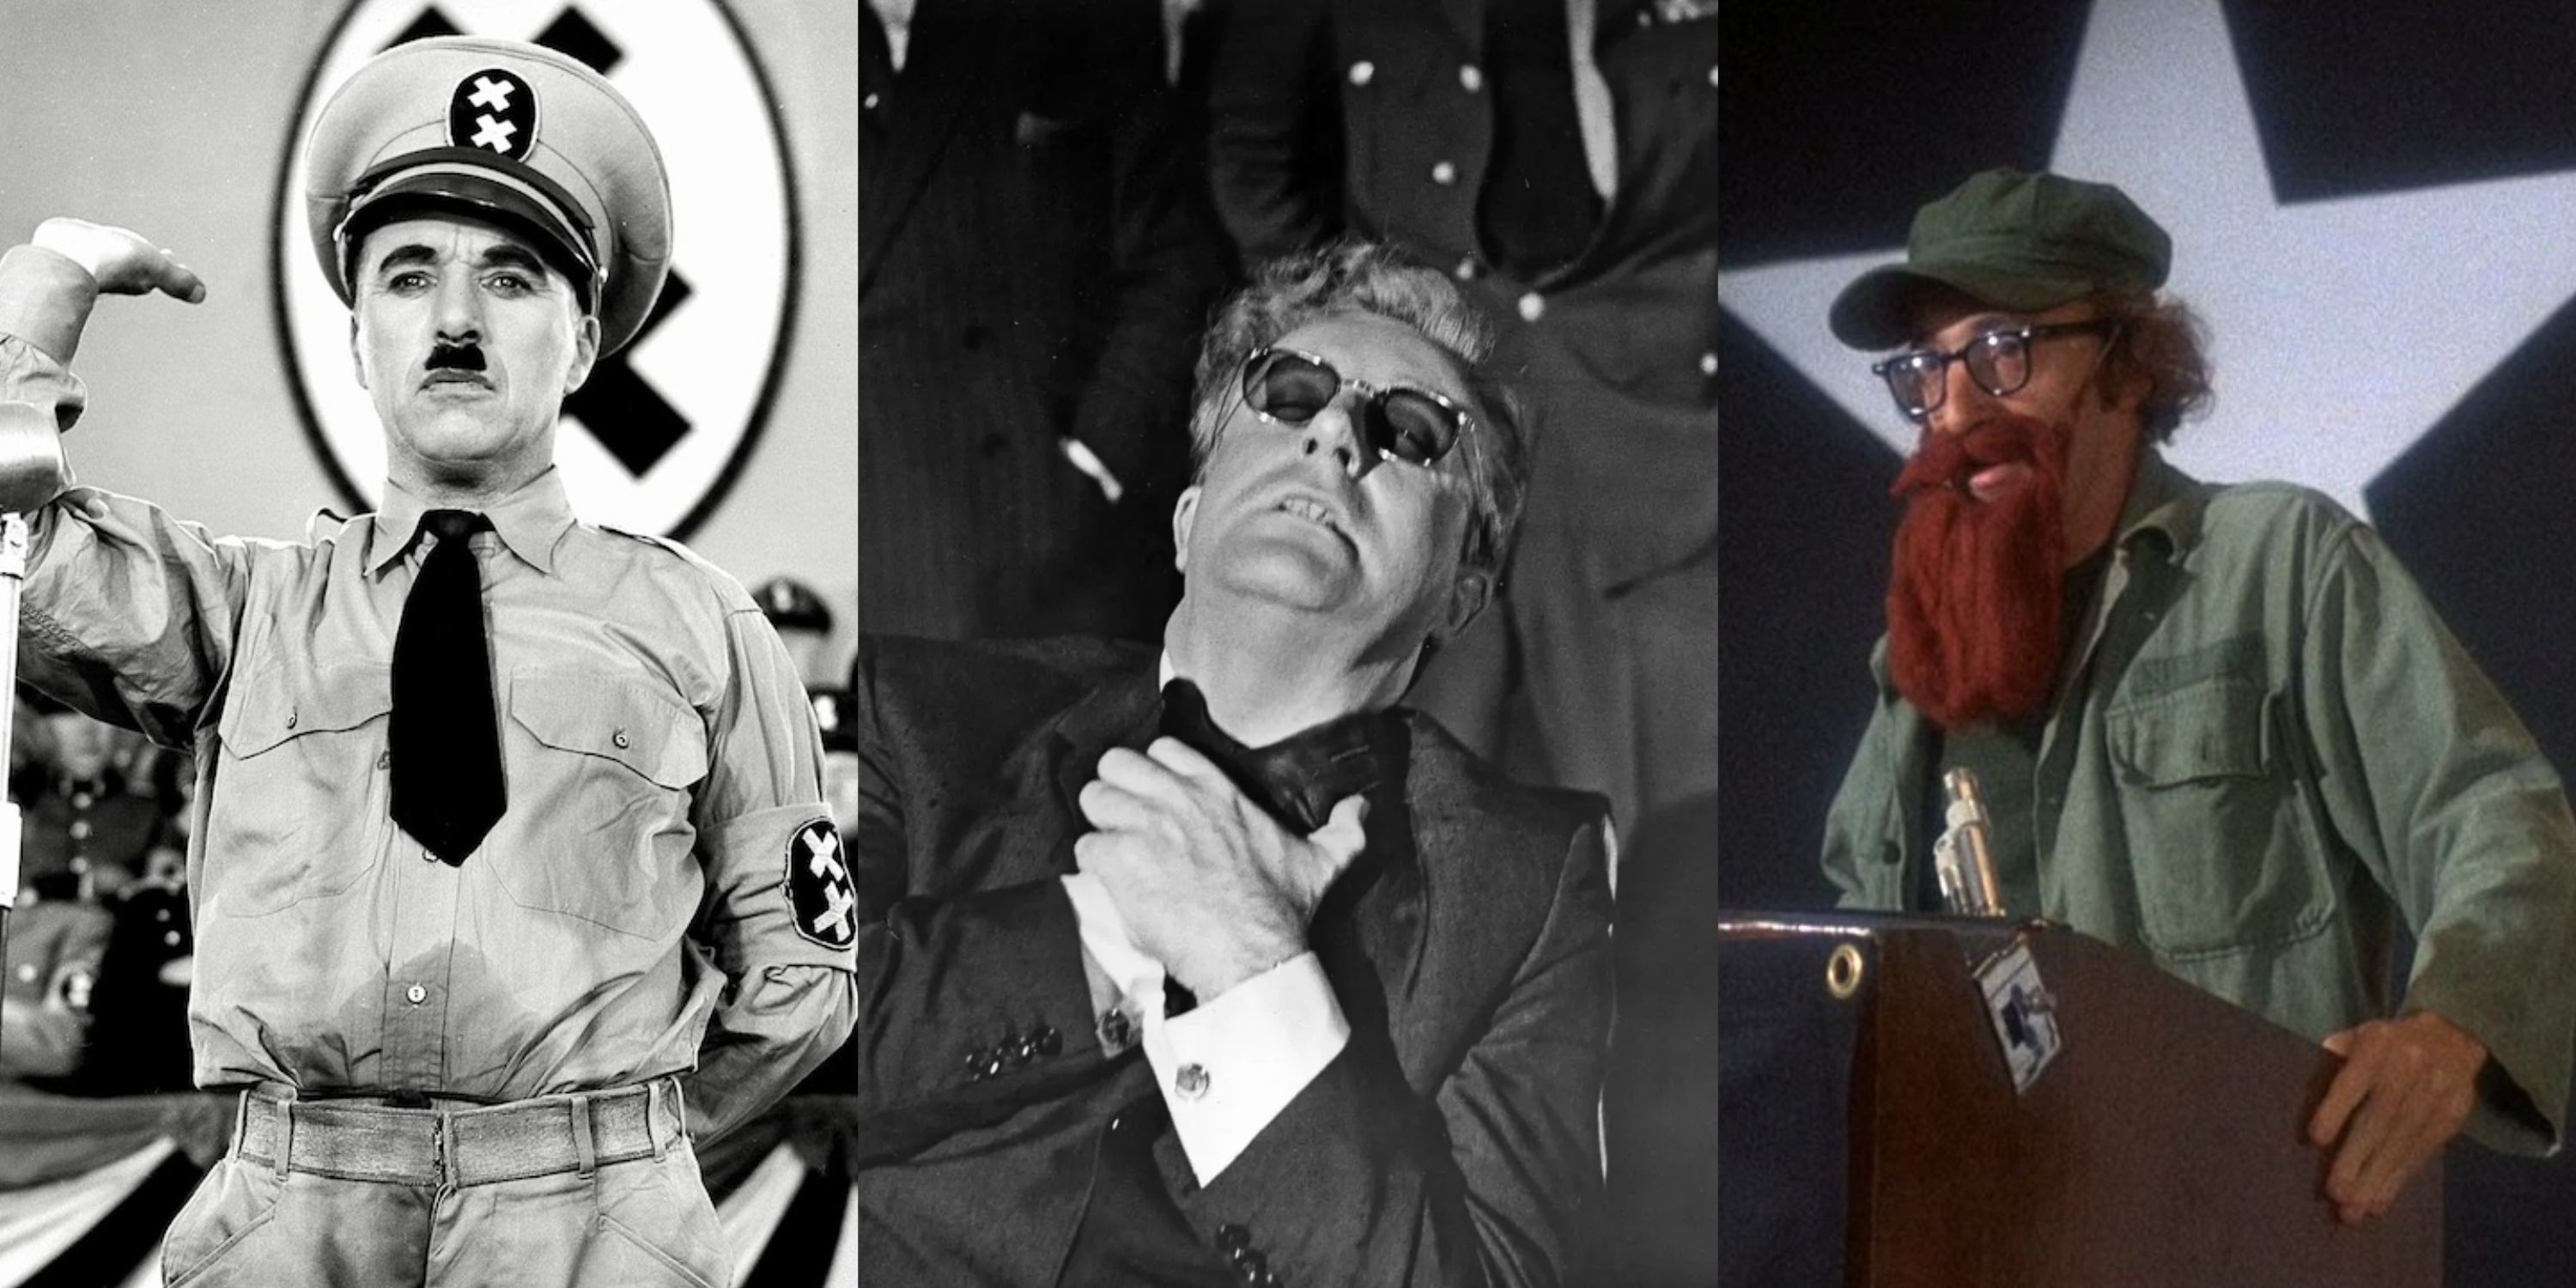 A split image of Charlie Chaplin in The Great Dictator, Peter Sellers in Dr. Strangelove, and Woody Allen in Bananas